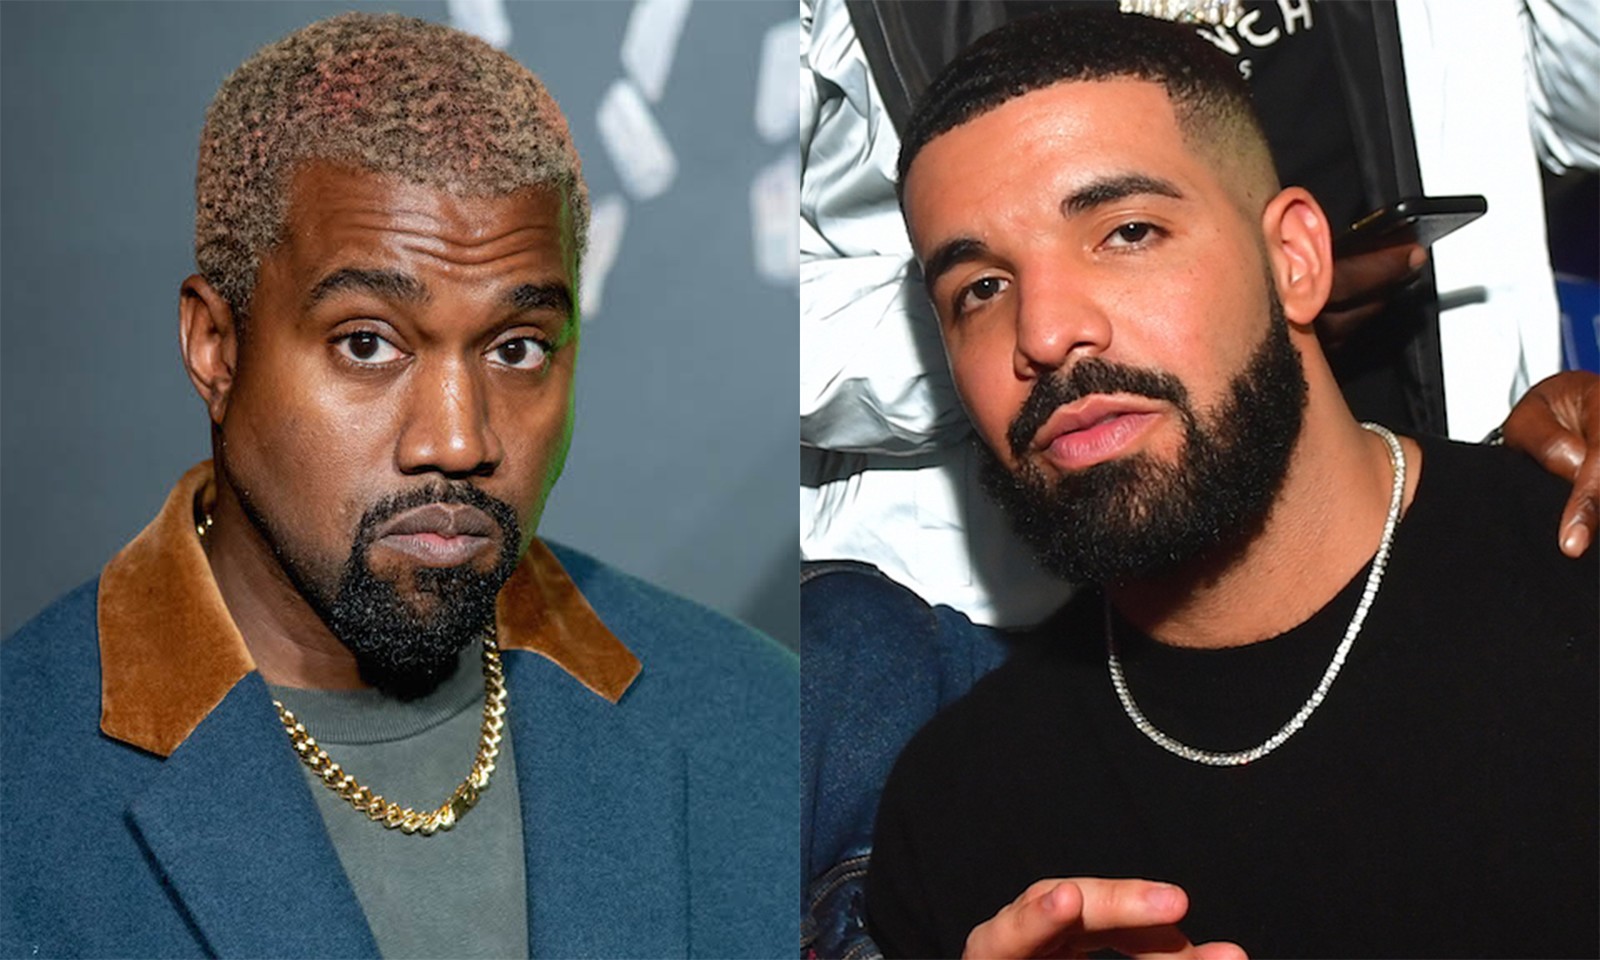 DON’T EXPECT DRAKE TO RAIN ‘CLB’ ON THE RELEASE DATE PARADE FOR KANYE WEST’S ‘DONDA’